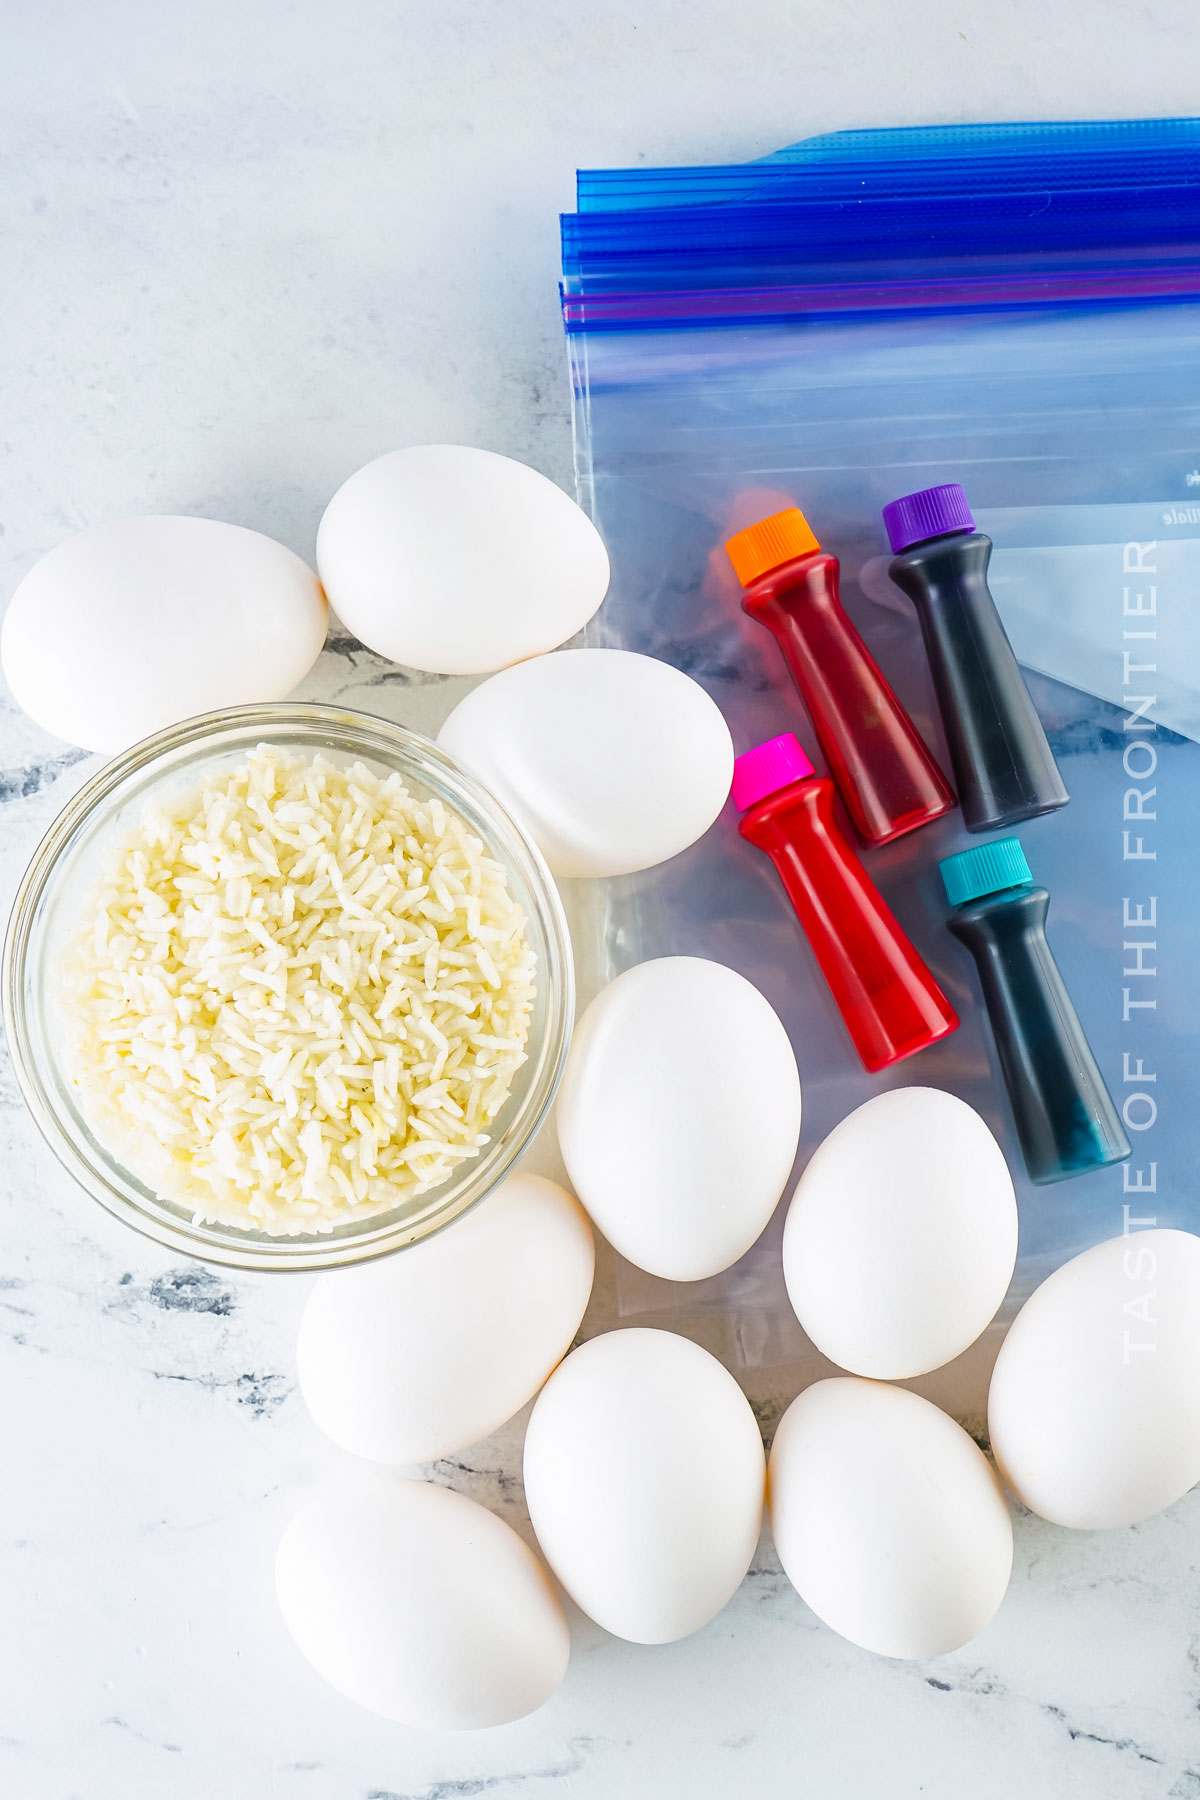 ingredients needed to color eggs